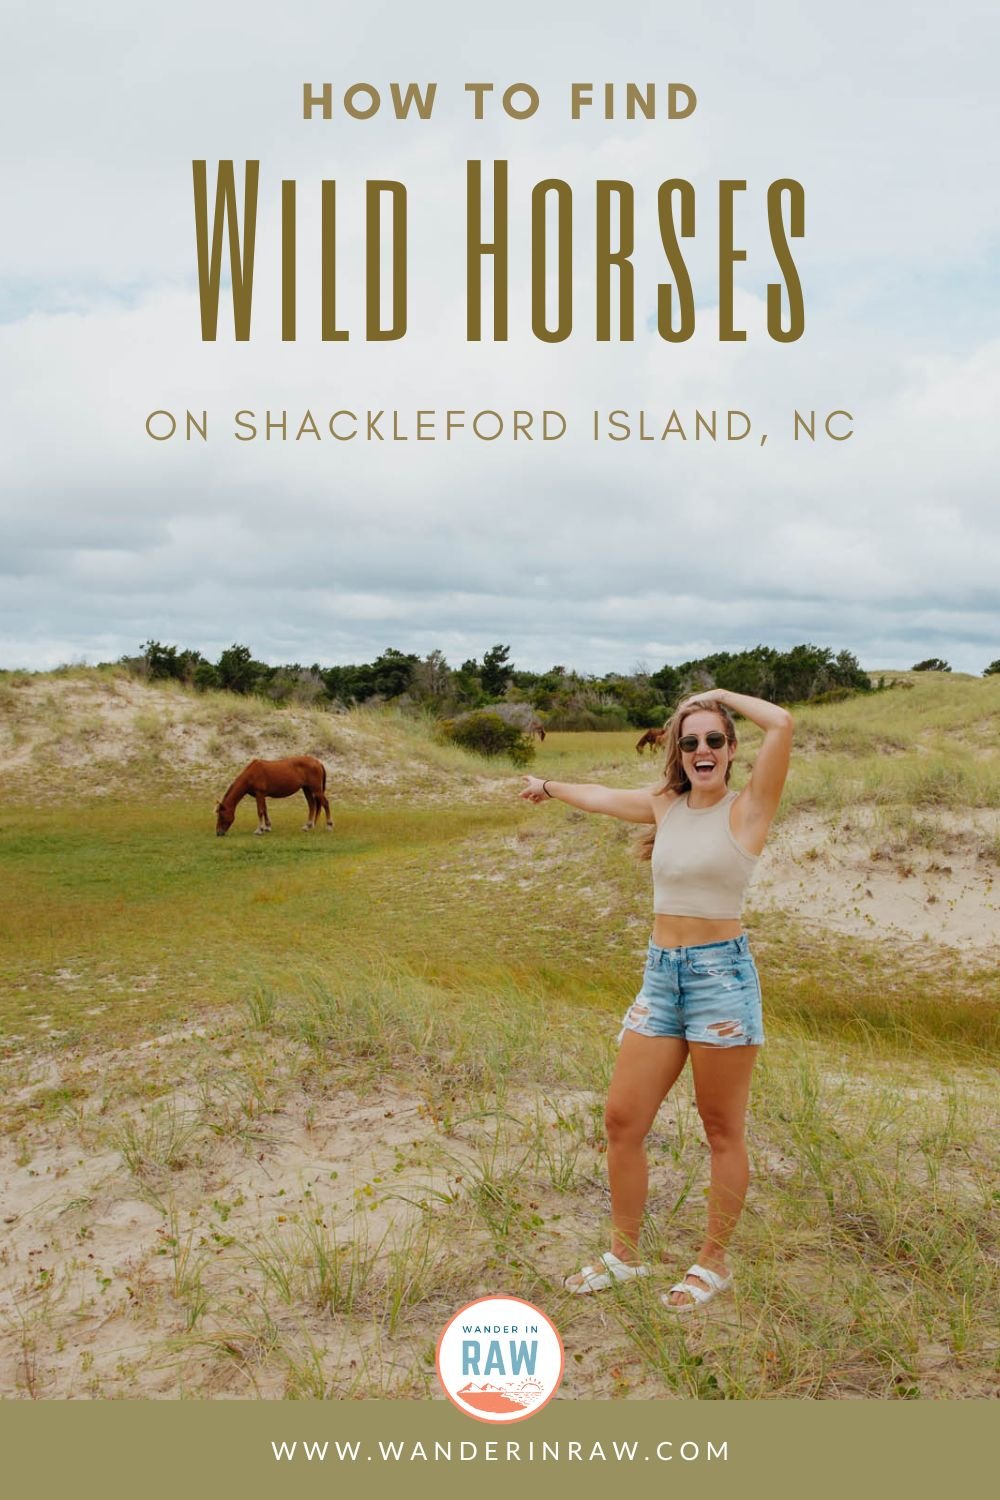 Shackleford Island: Where to Find the Outer Banks Wild Horses